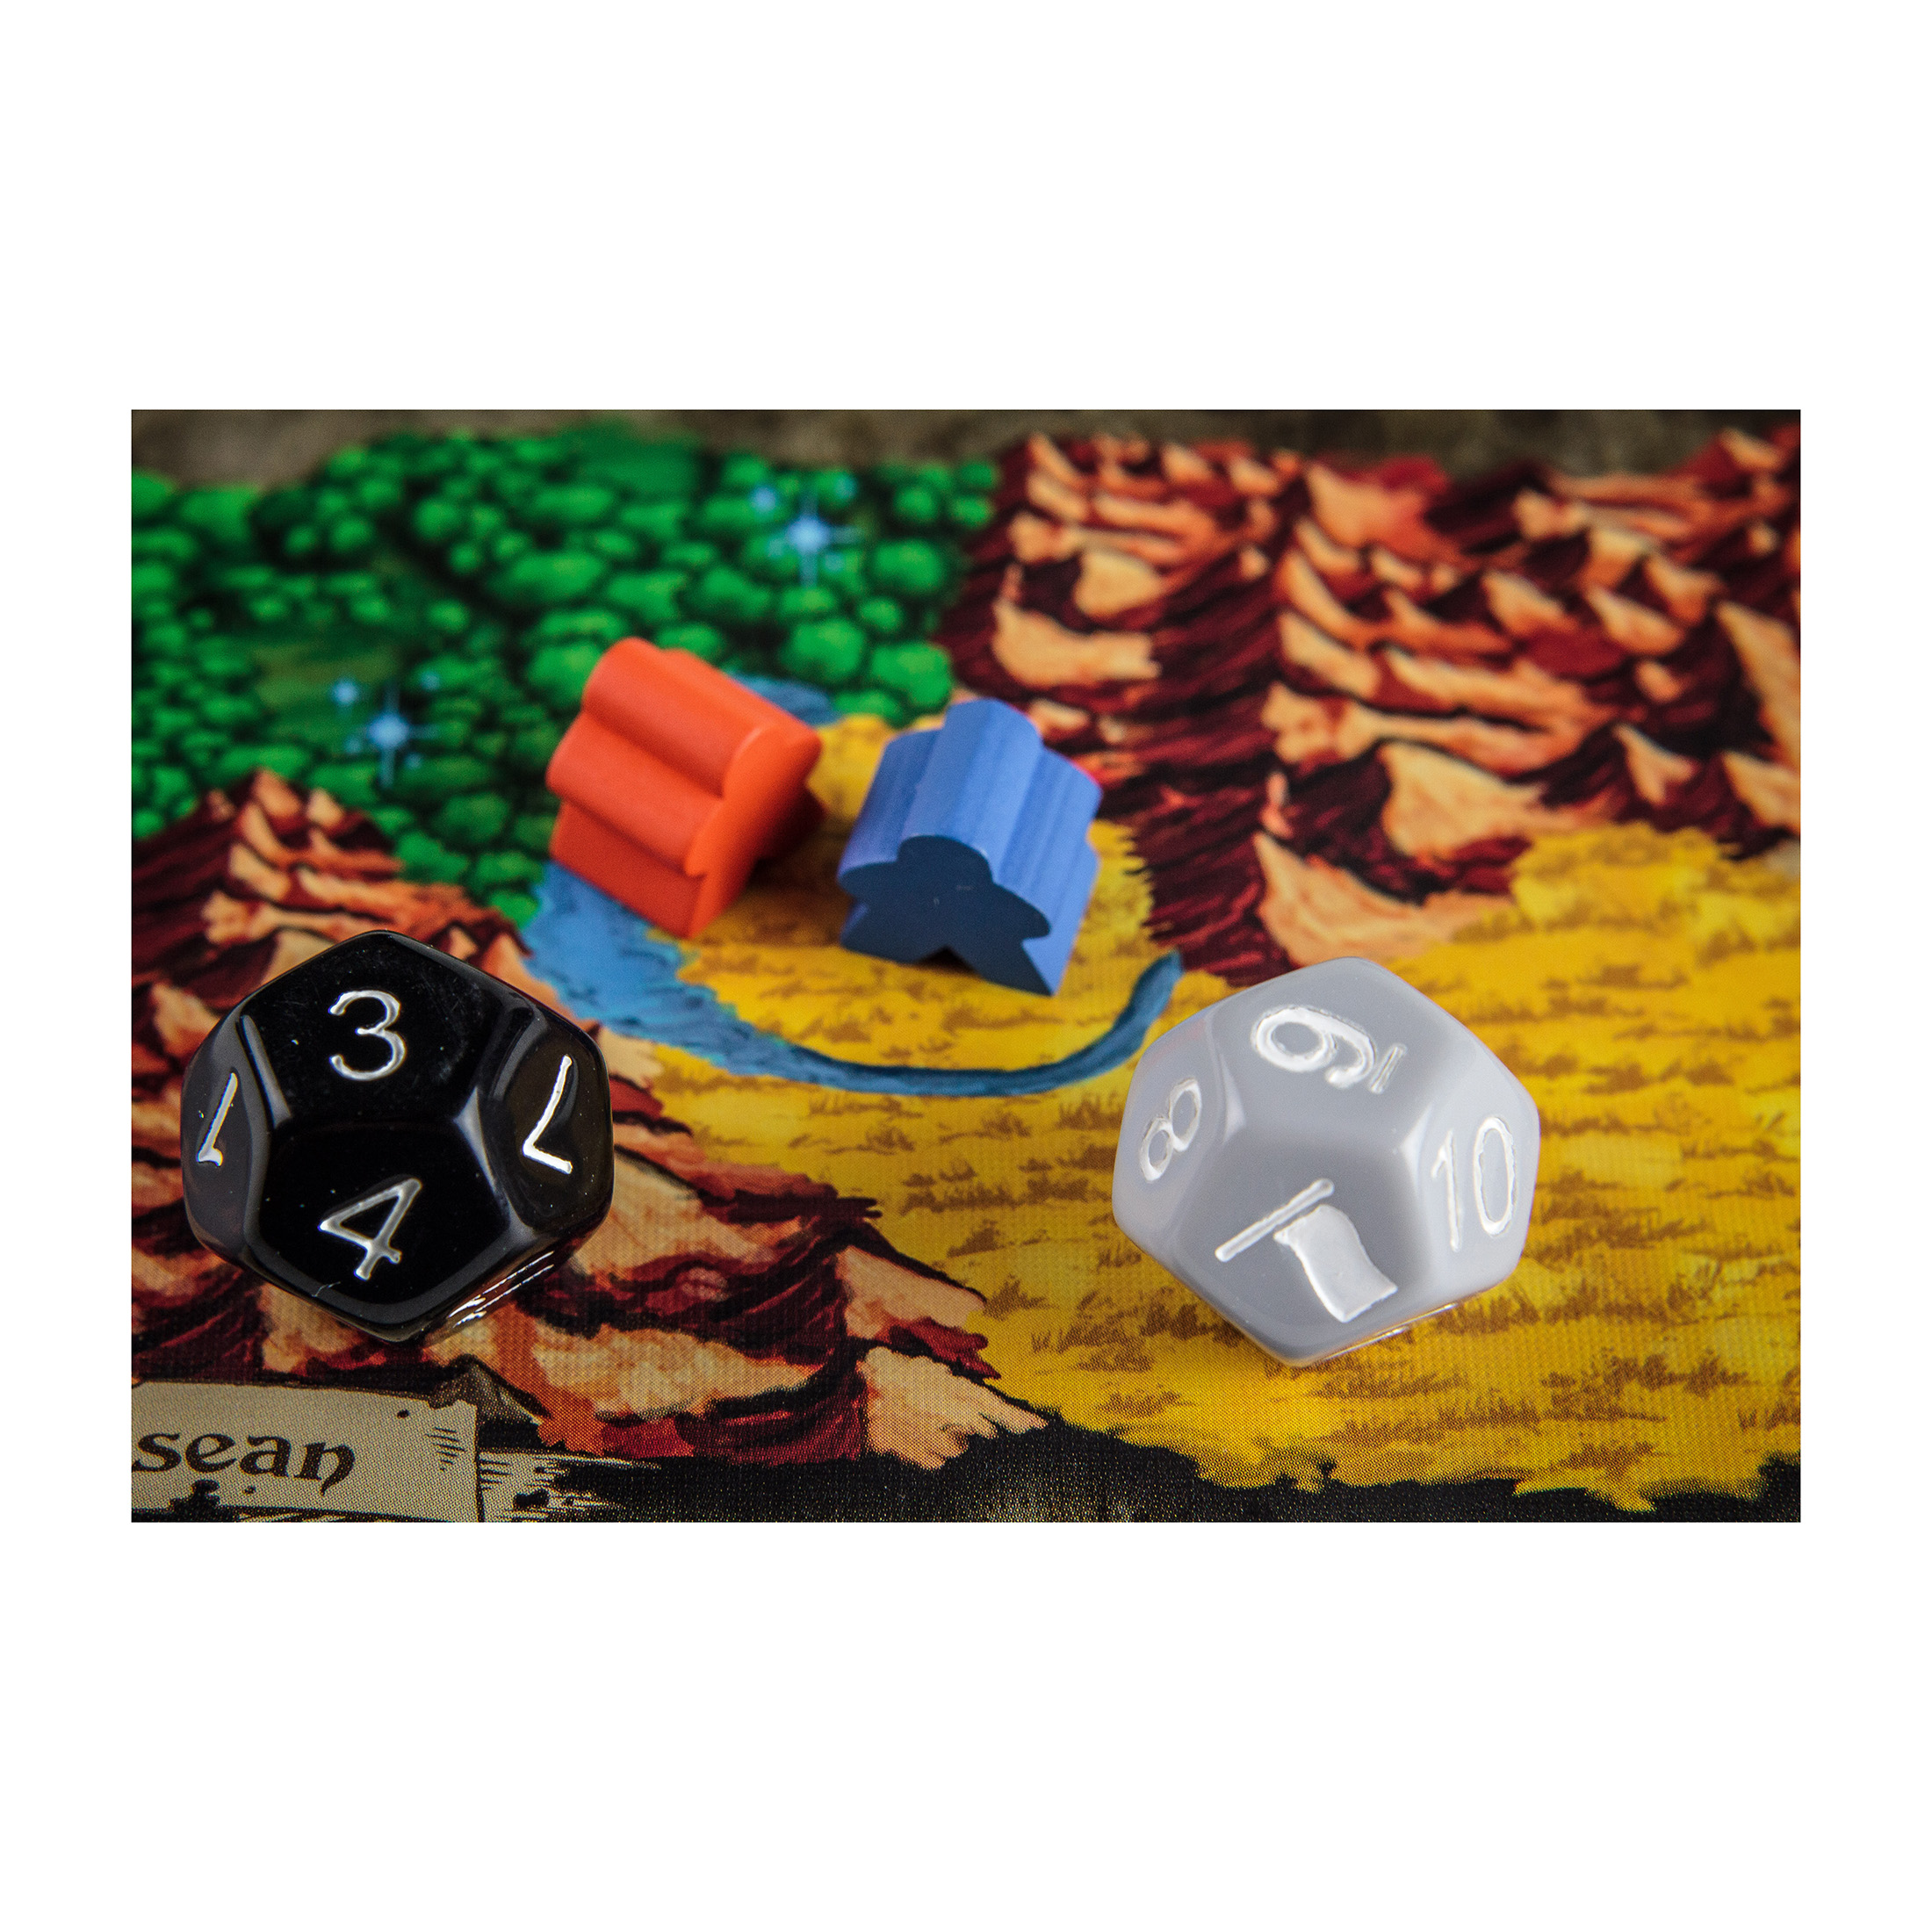 Tiny Epic Kingdoms Strategy Board Game: a Small Box 4X Fantasy Game by Scott almes - image 4 of 4